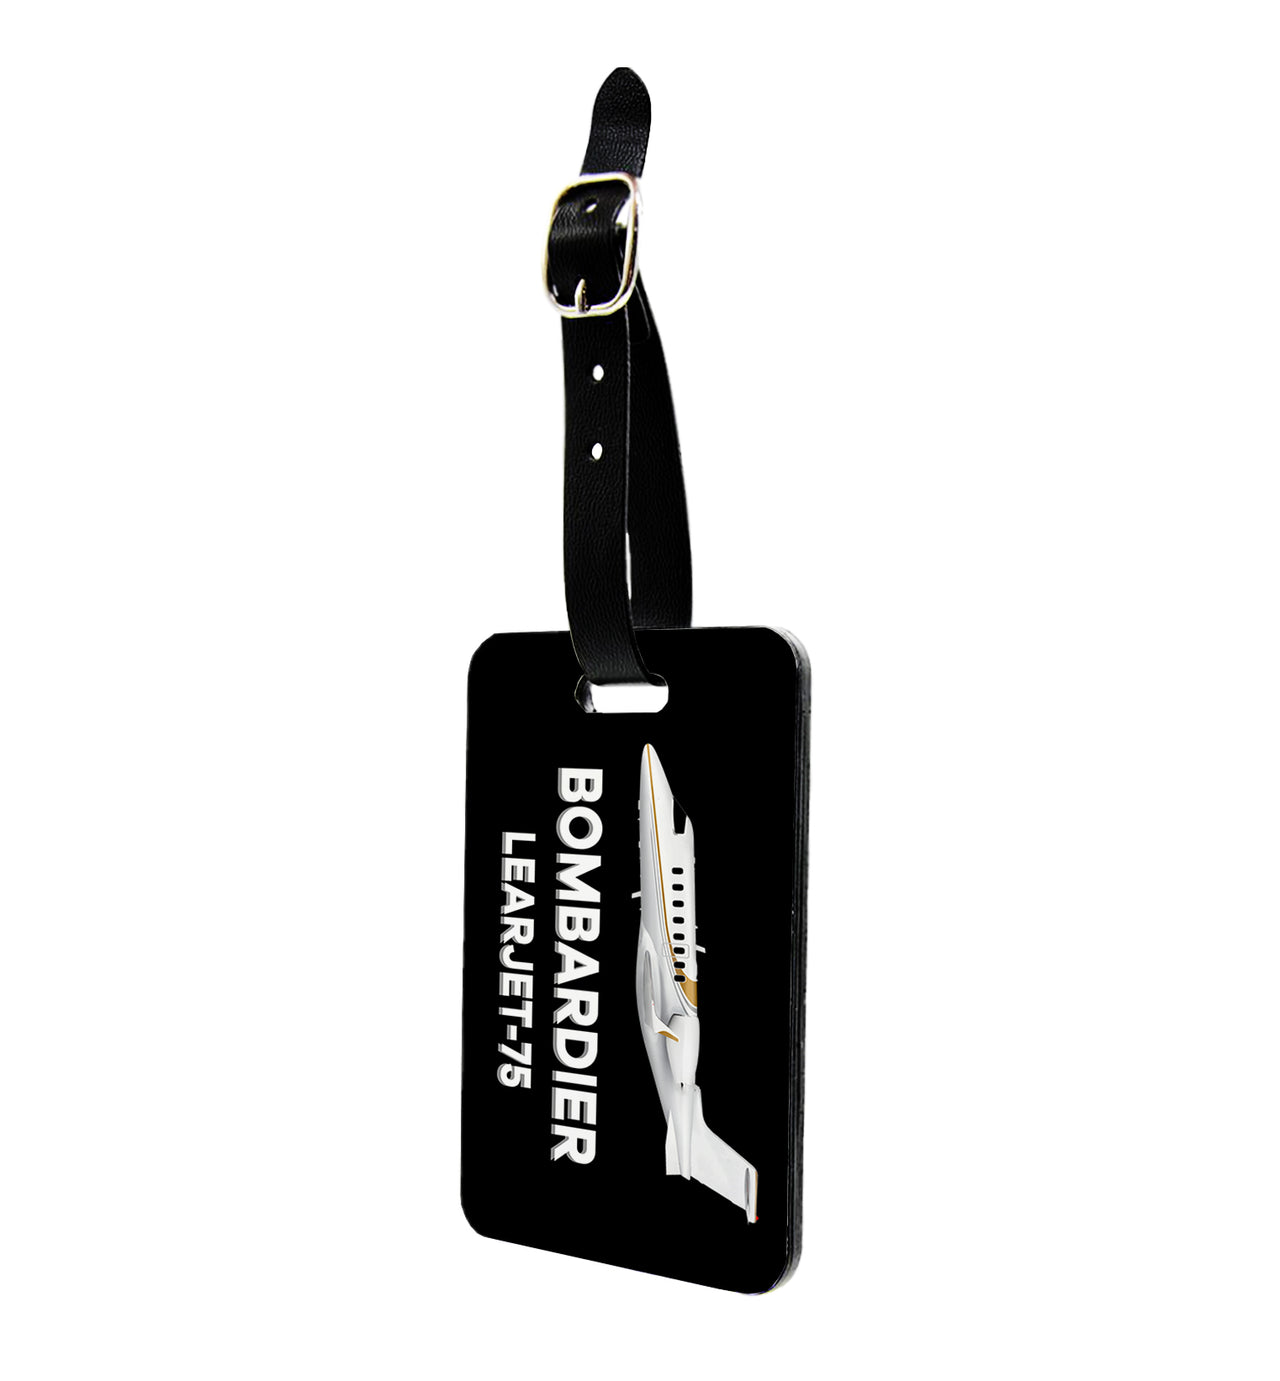 The Bombardier Learjet 75 Designed Luggage Tag